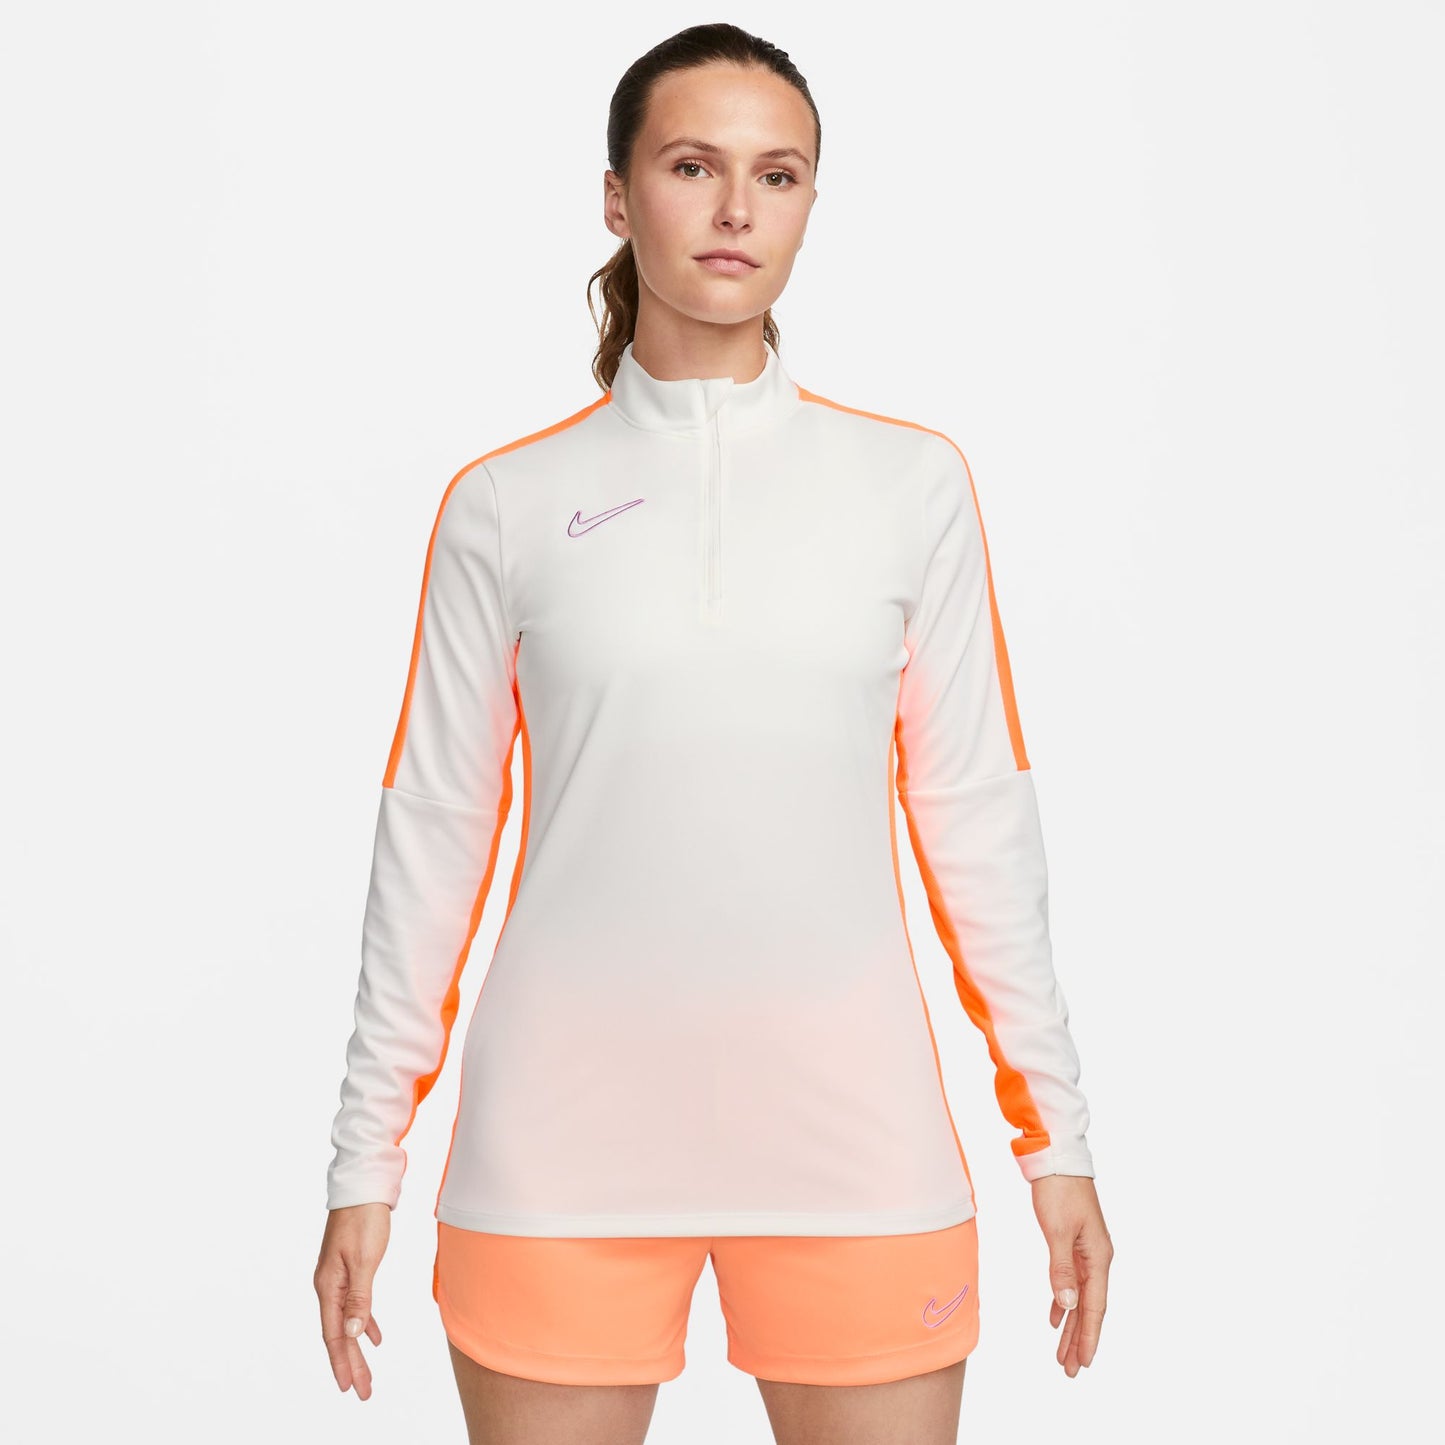 Nike Dri-FIT Academy - Women's Soccer Drill Top - White and Orange